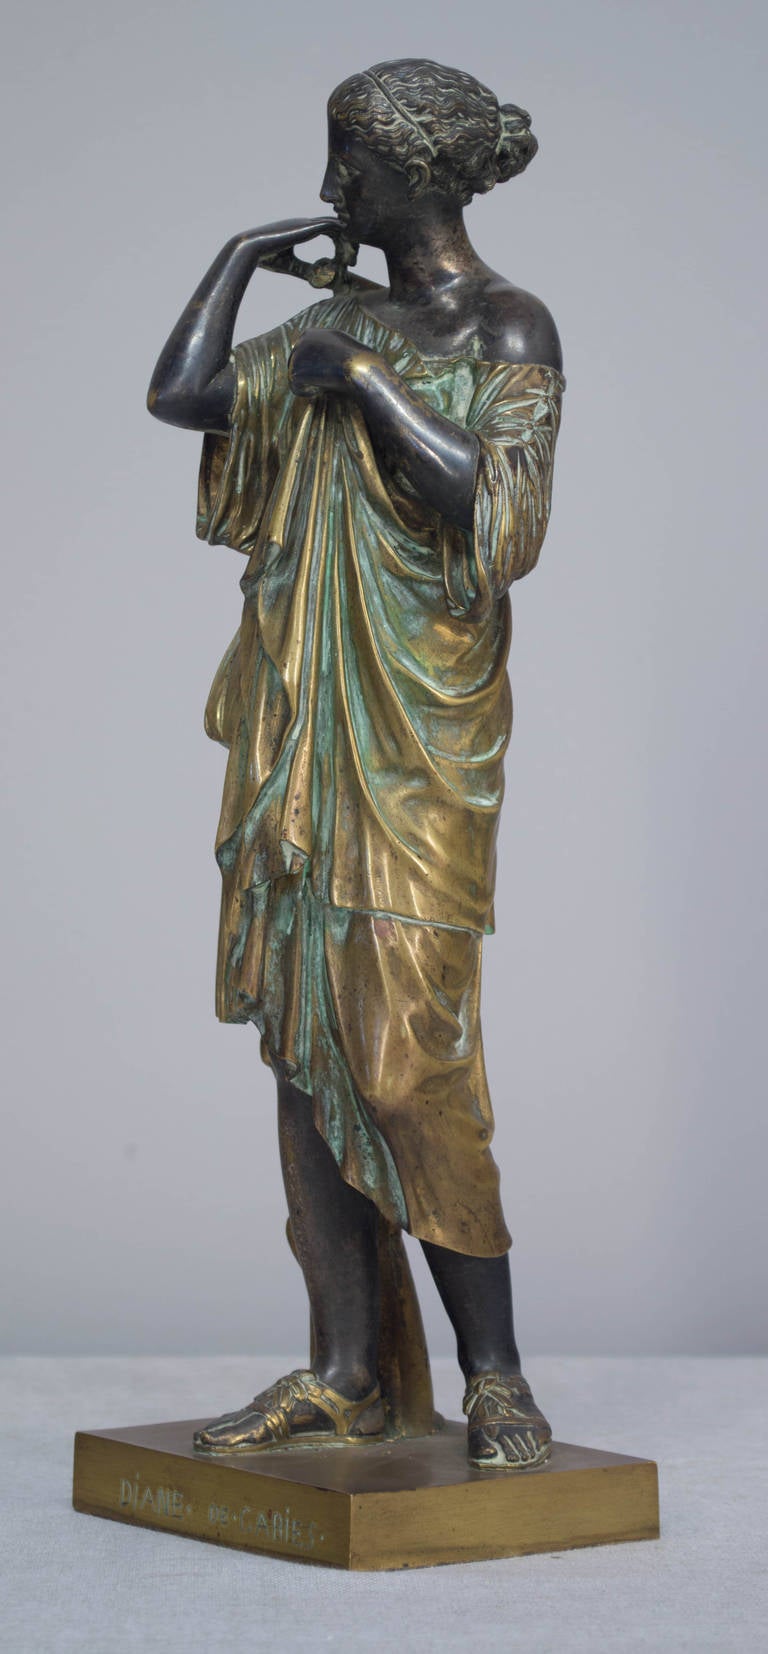 A patinated and gilt bronze of Diane de Gabies, well executed with a wonderful patina. Signed A. Lemaire, bronze sculptor from the mid-19th century who worked in Le Marais, rue Vieille du Temple, Paris, obtained a medal at the Universel Exposition